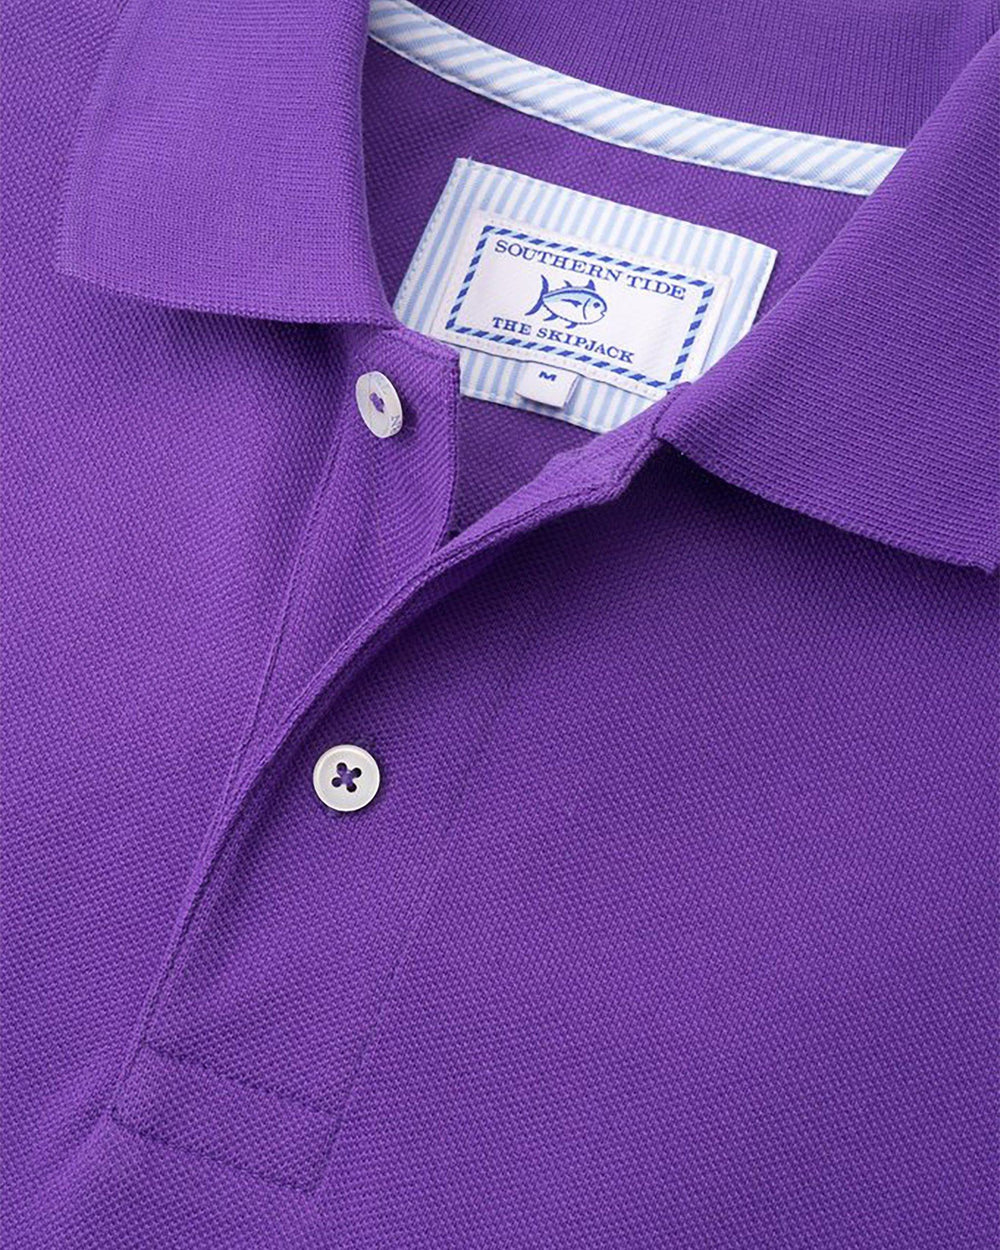 The detail of the Men's Purple Clemson Tigers Pique Polo Shirt by Southern Tide - Regal Purple